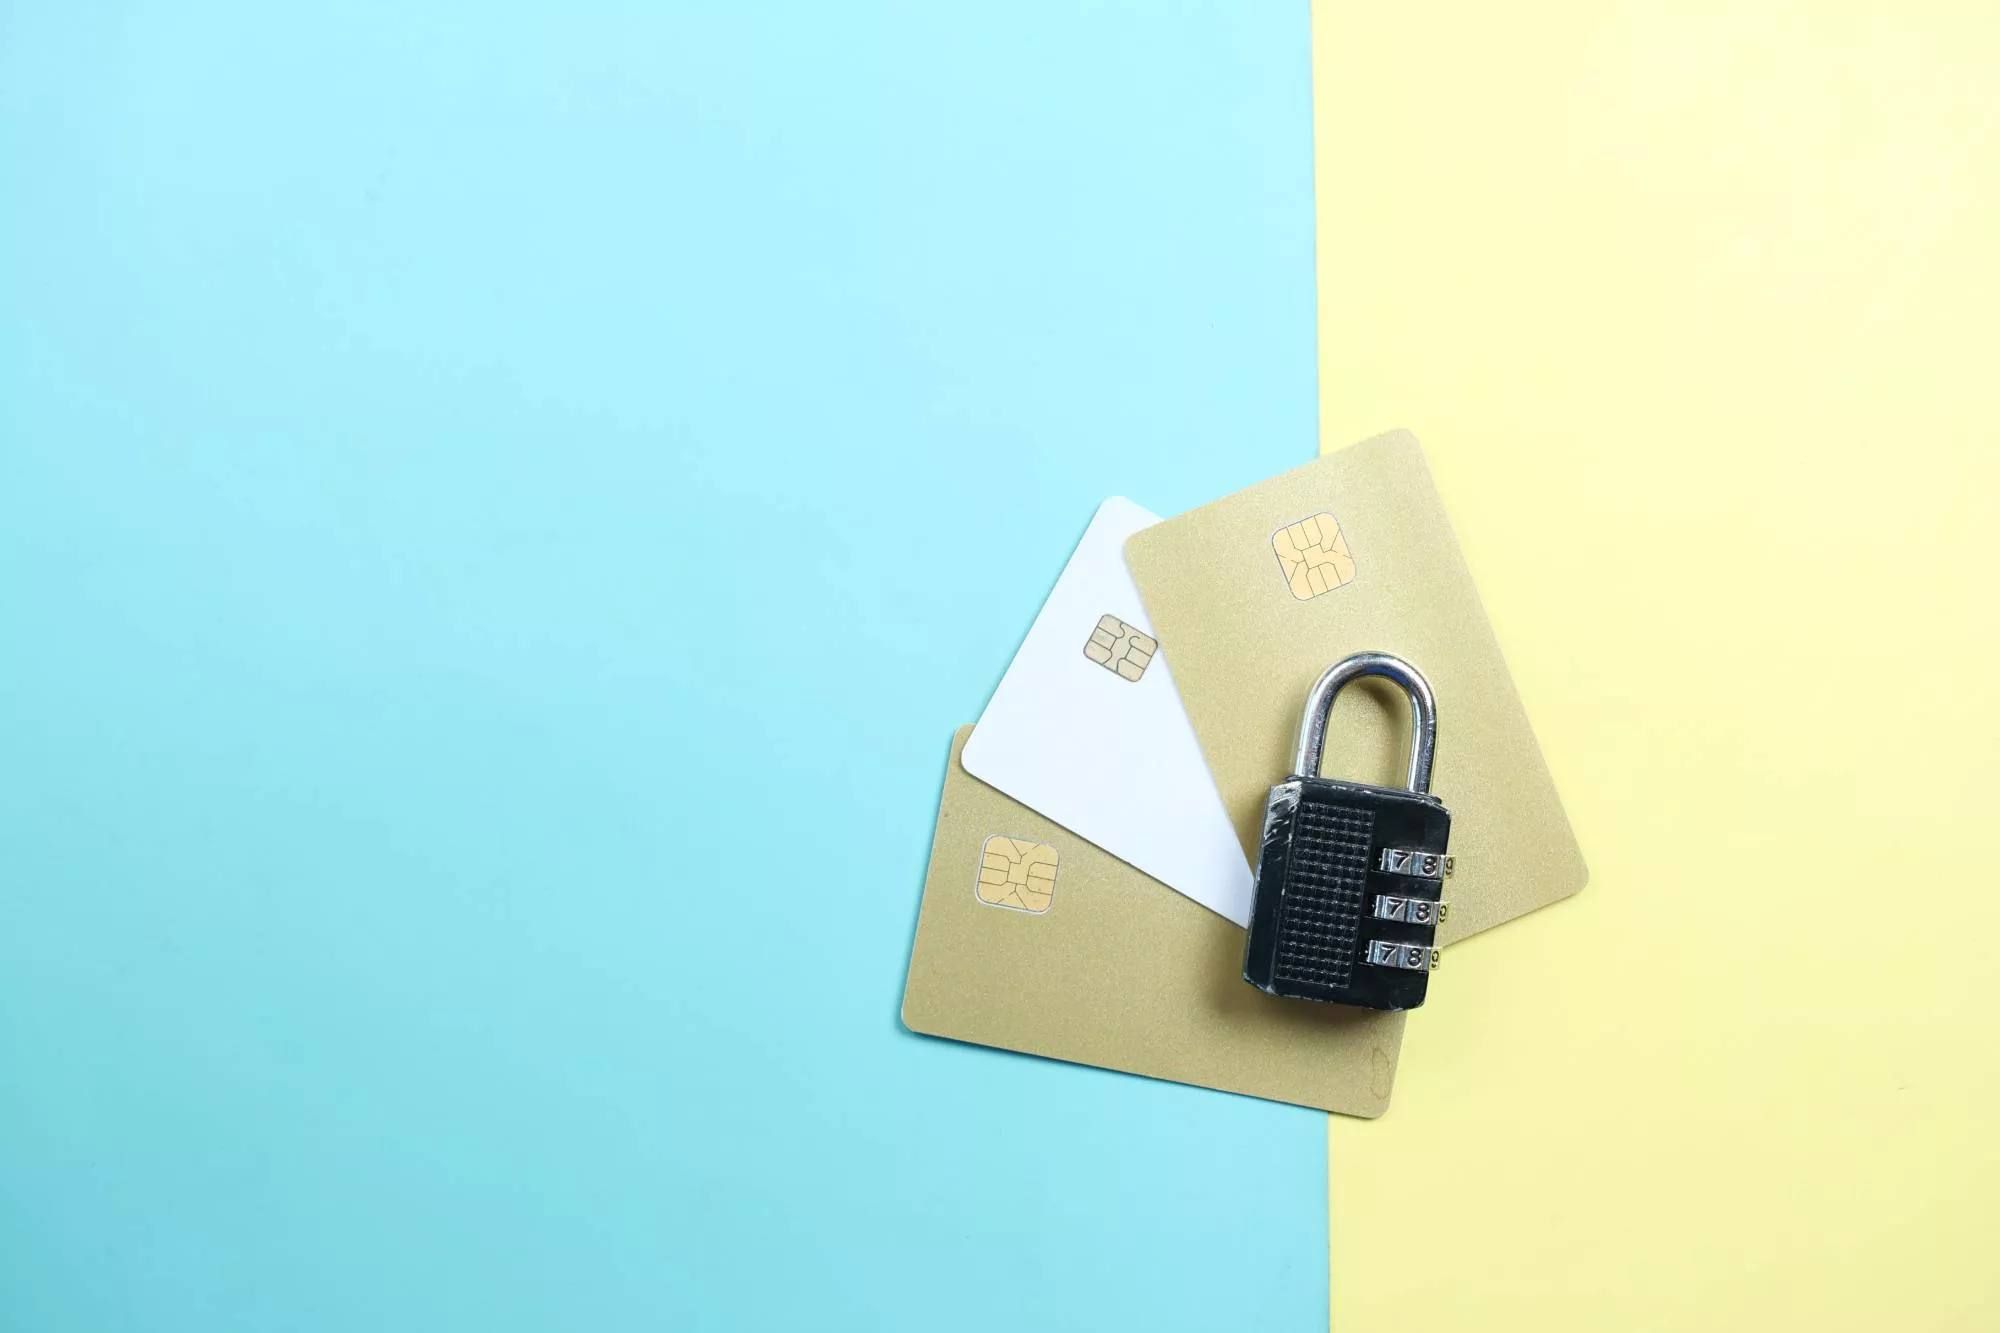 image of three credit cards with a lock on top on a blue and yellow background to show the security of a signature panel code